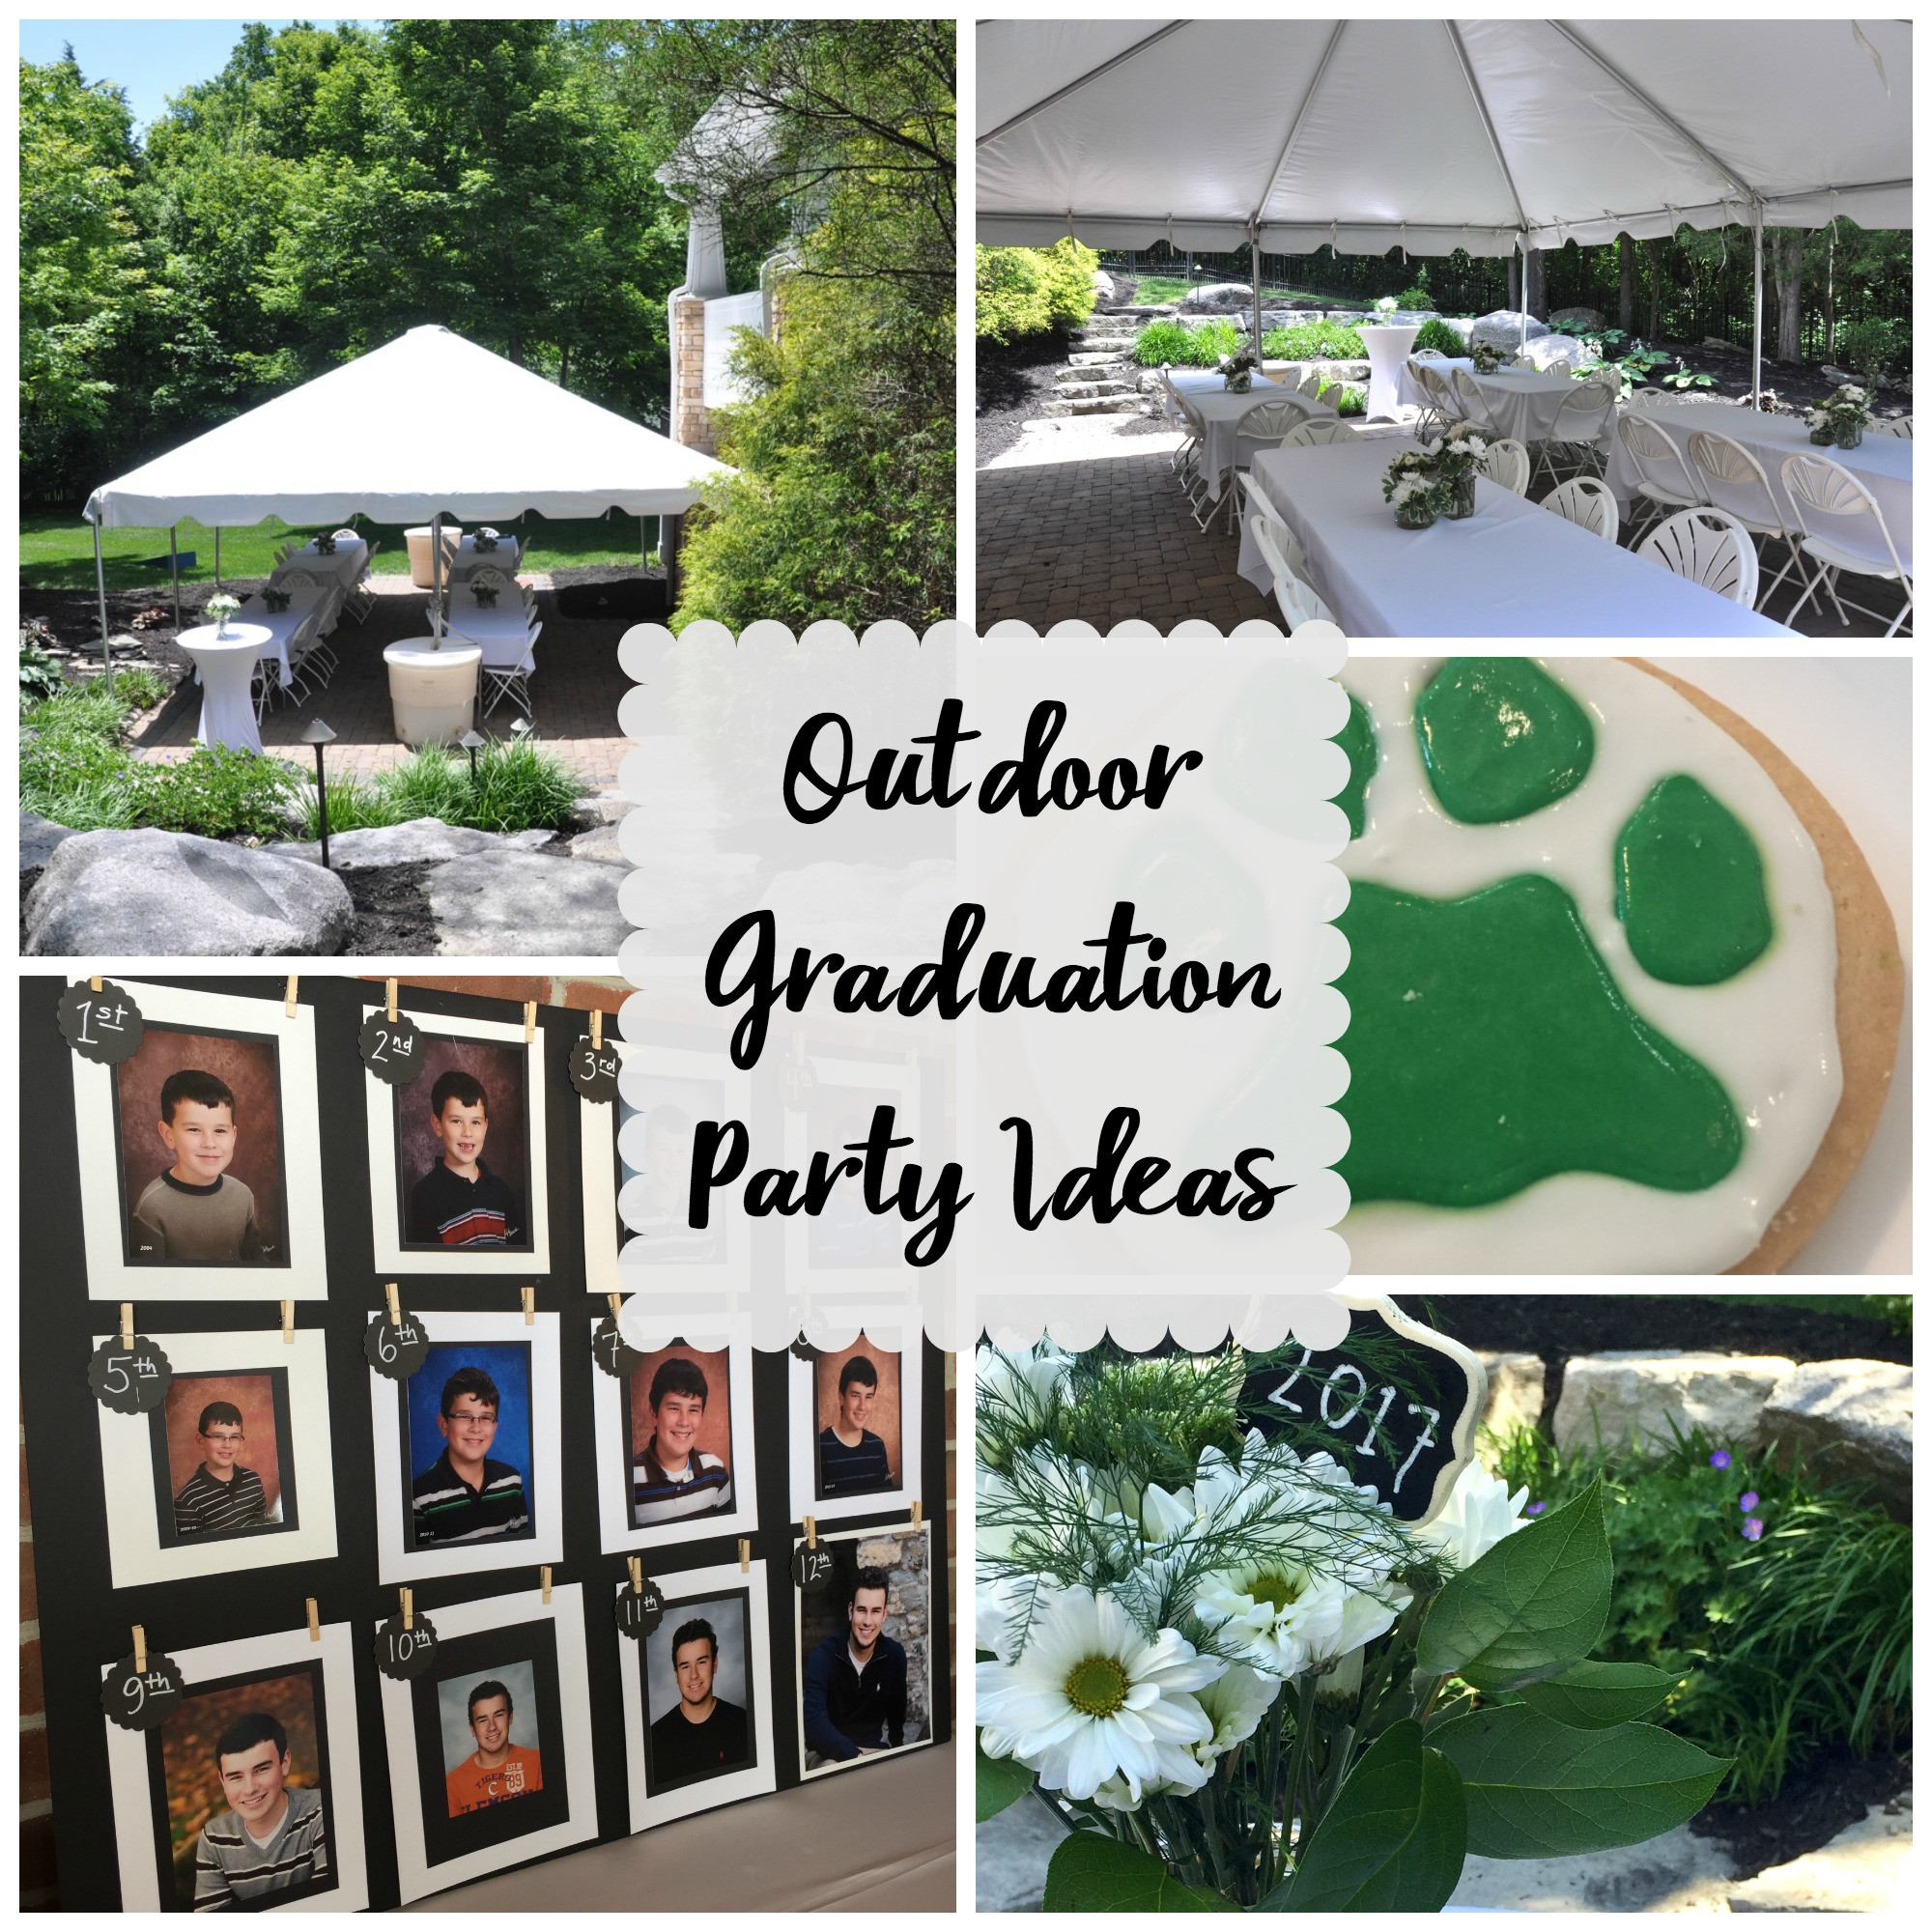 Crazy Graduation Party Ideas
 Outdoor Graduation Party Evolution of Style